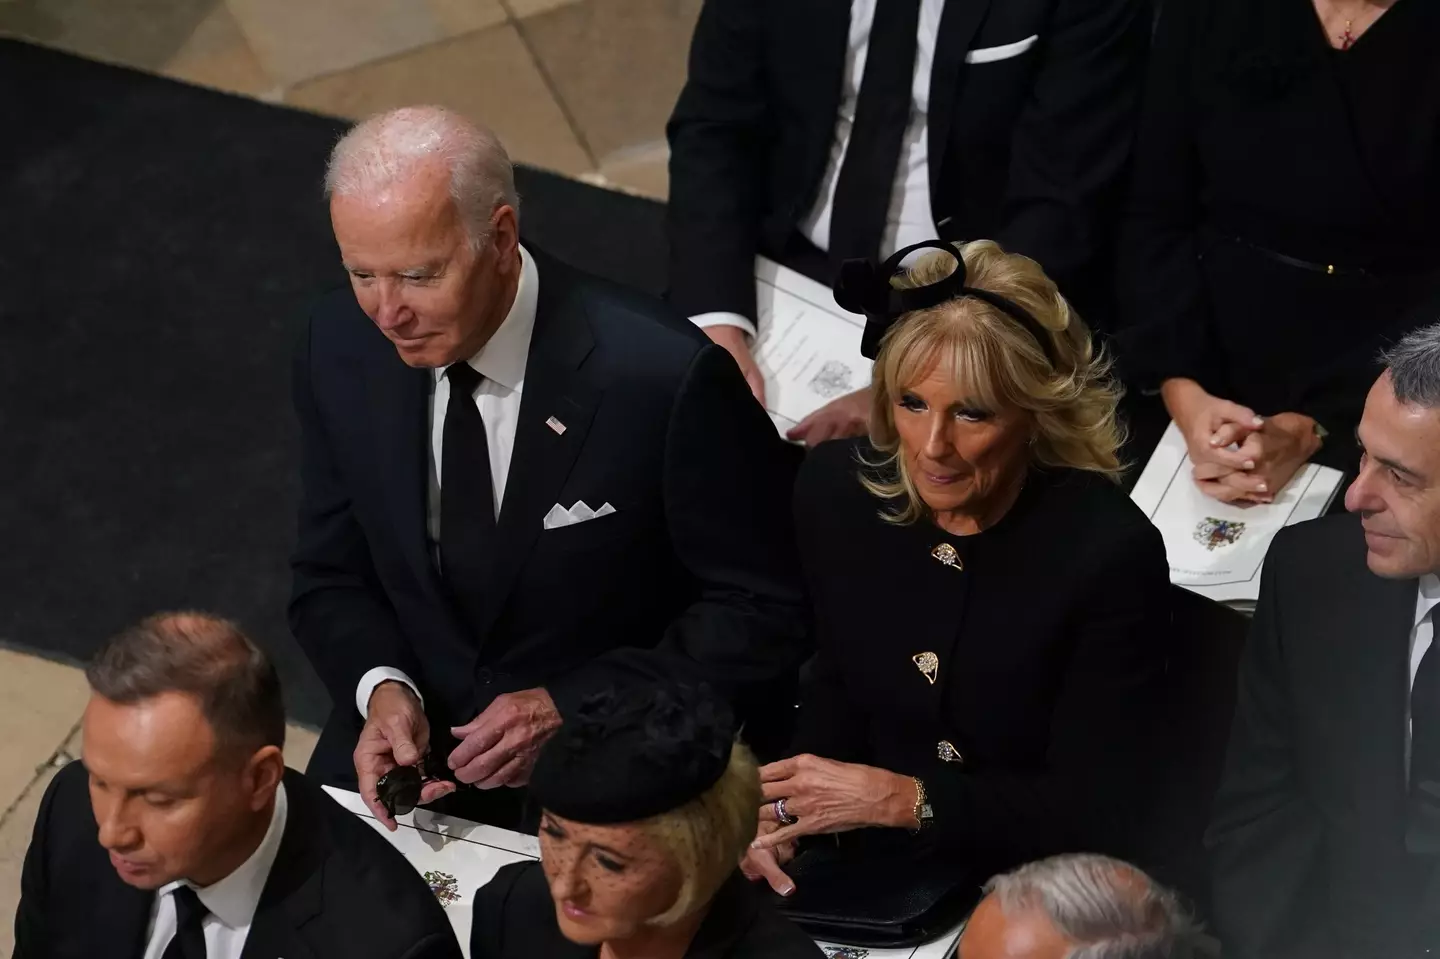 US President Joe Biden and his wife, Jill, were sat 14 rows back in a section allocated to global heads of state.